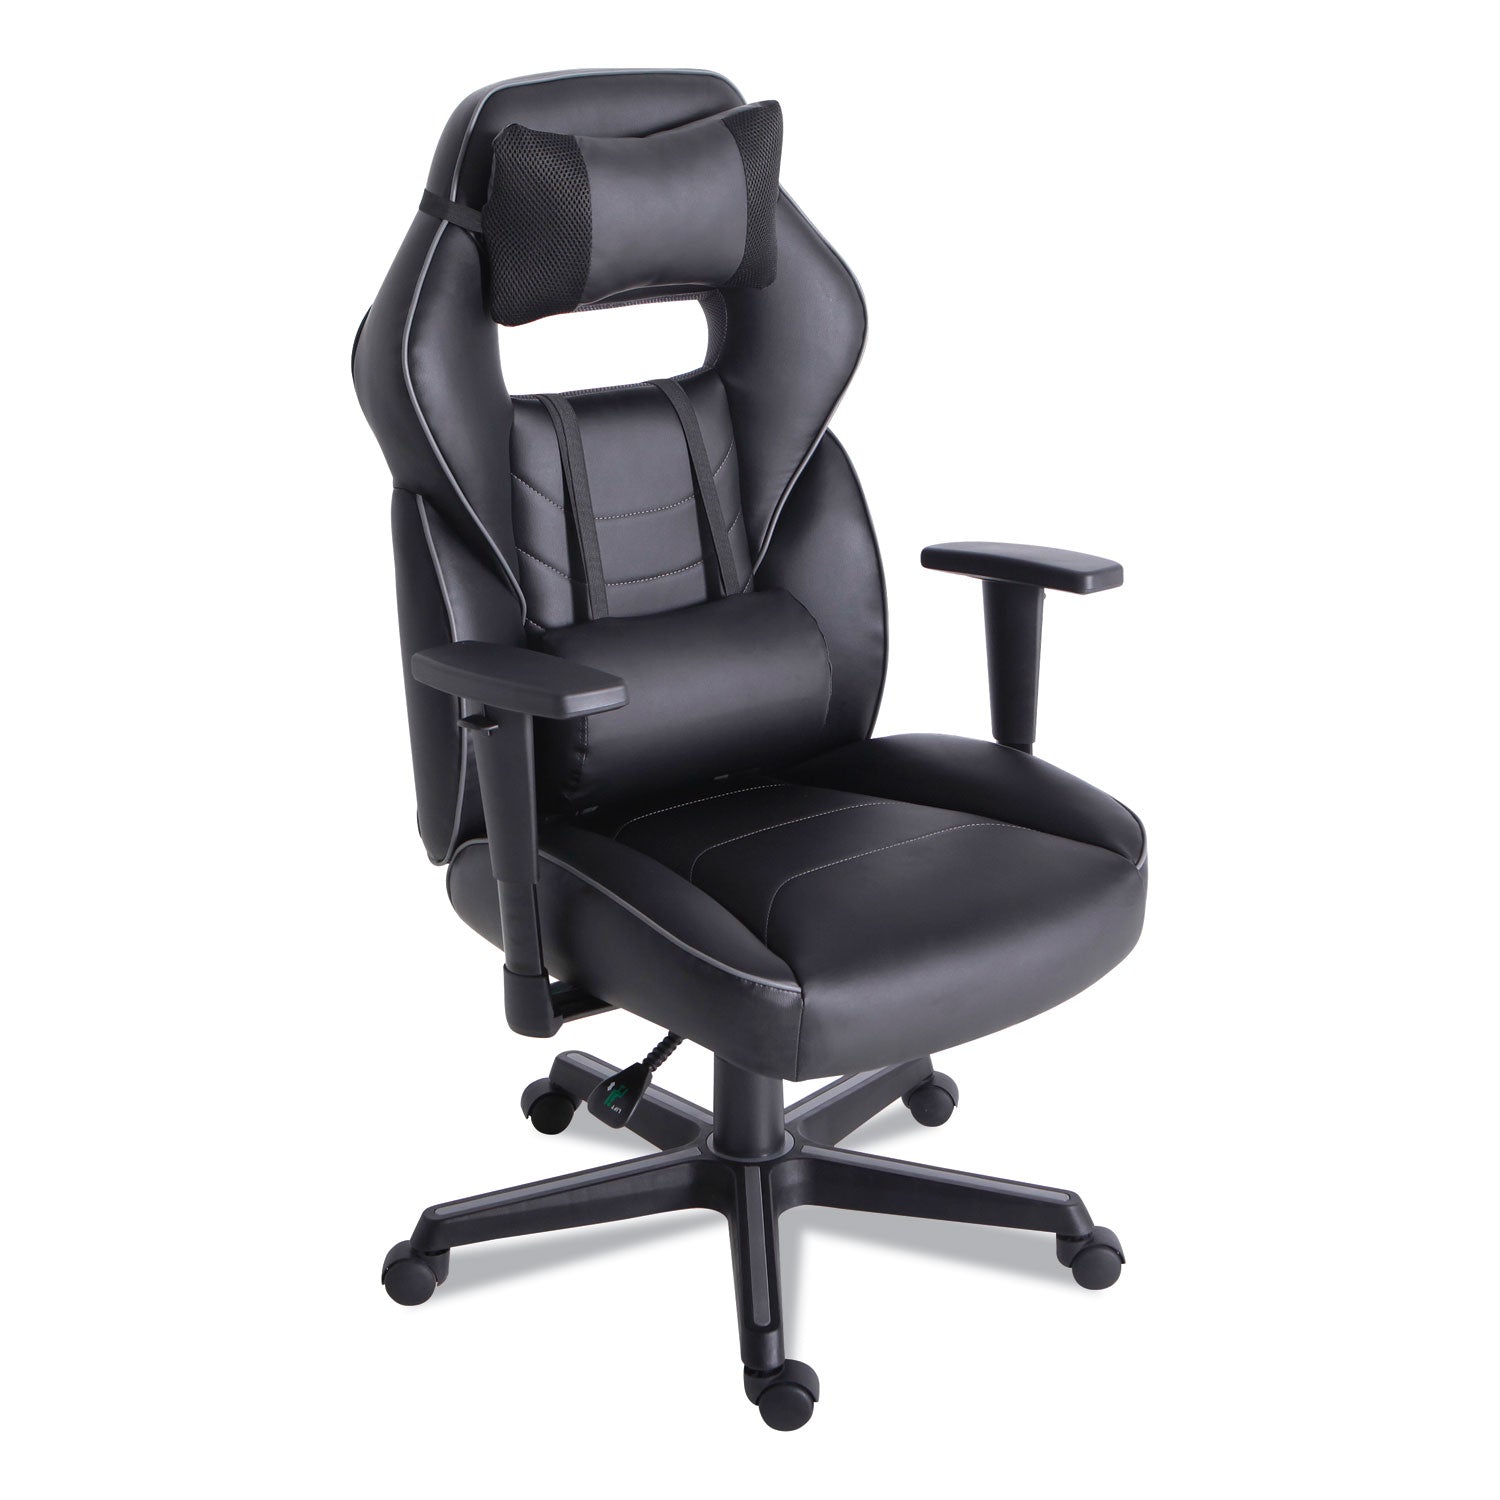 racing-style-ergonomic-gaming-chair-supports-275-lb-1591-to-198-seat-height-black-gray-trim-seat-back-black-gray-base_alegm4146 - 1